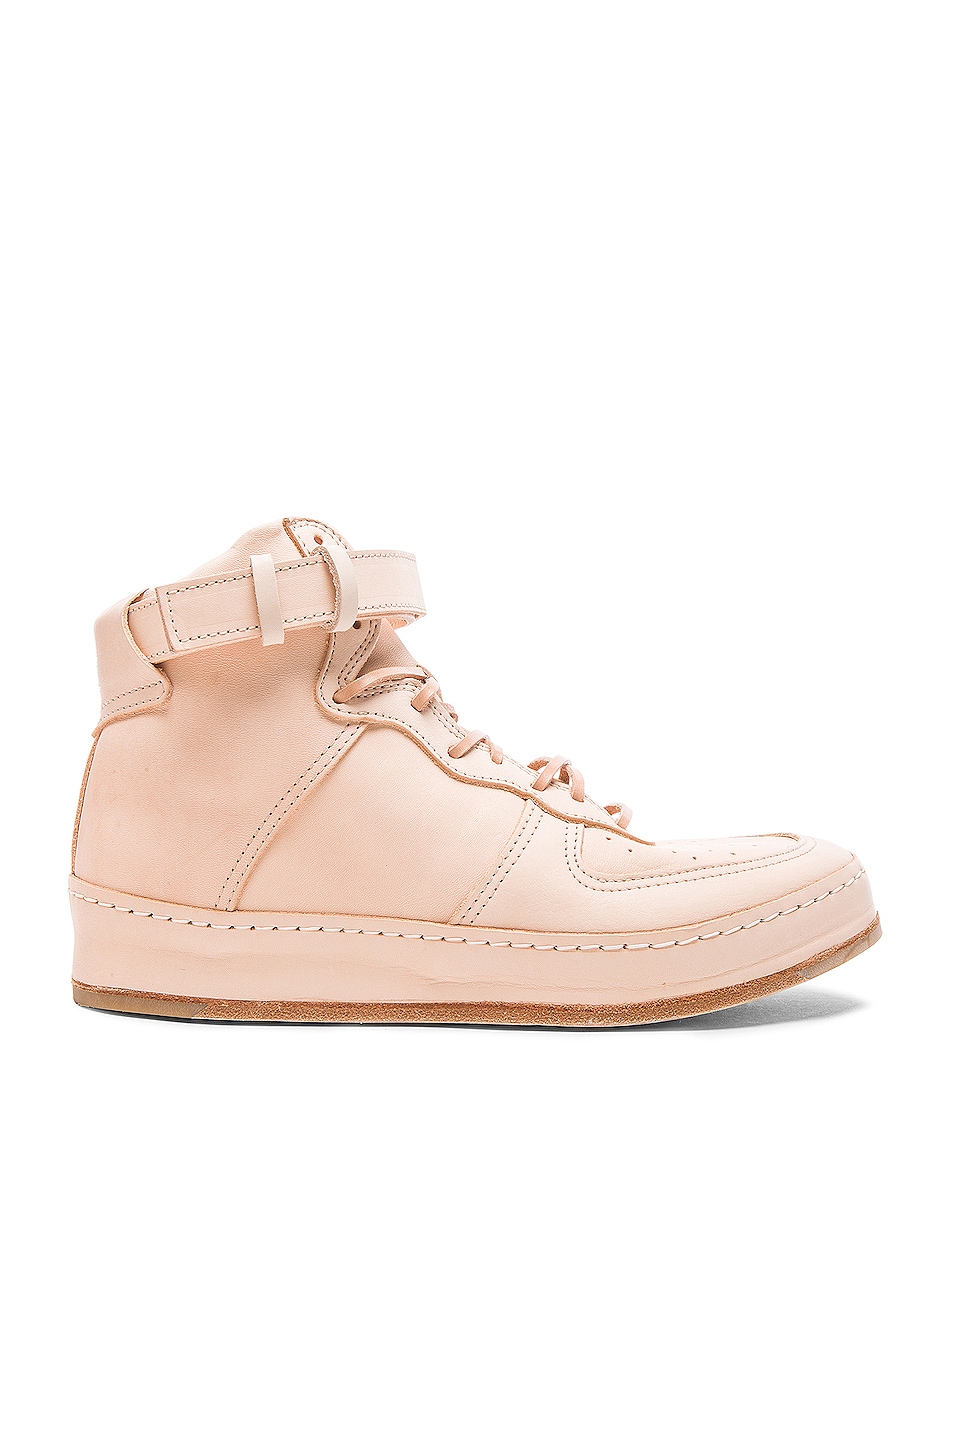 Hender Scheme Manual Industrial Product 01 in Natural | FWRD